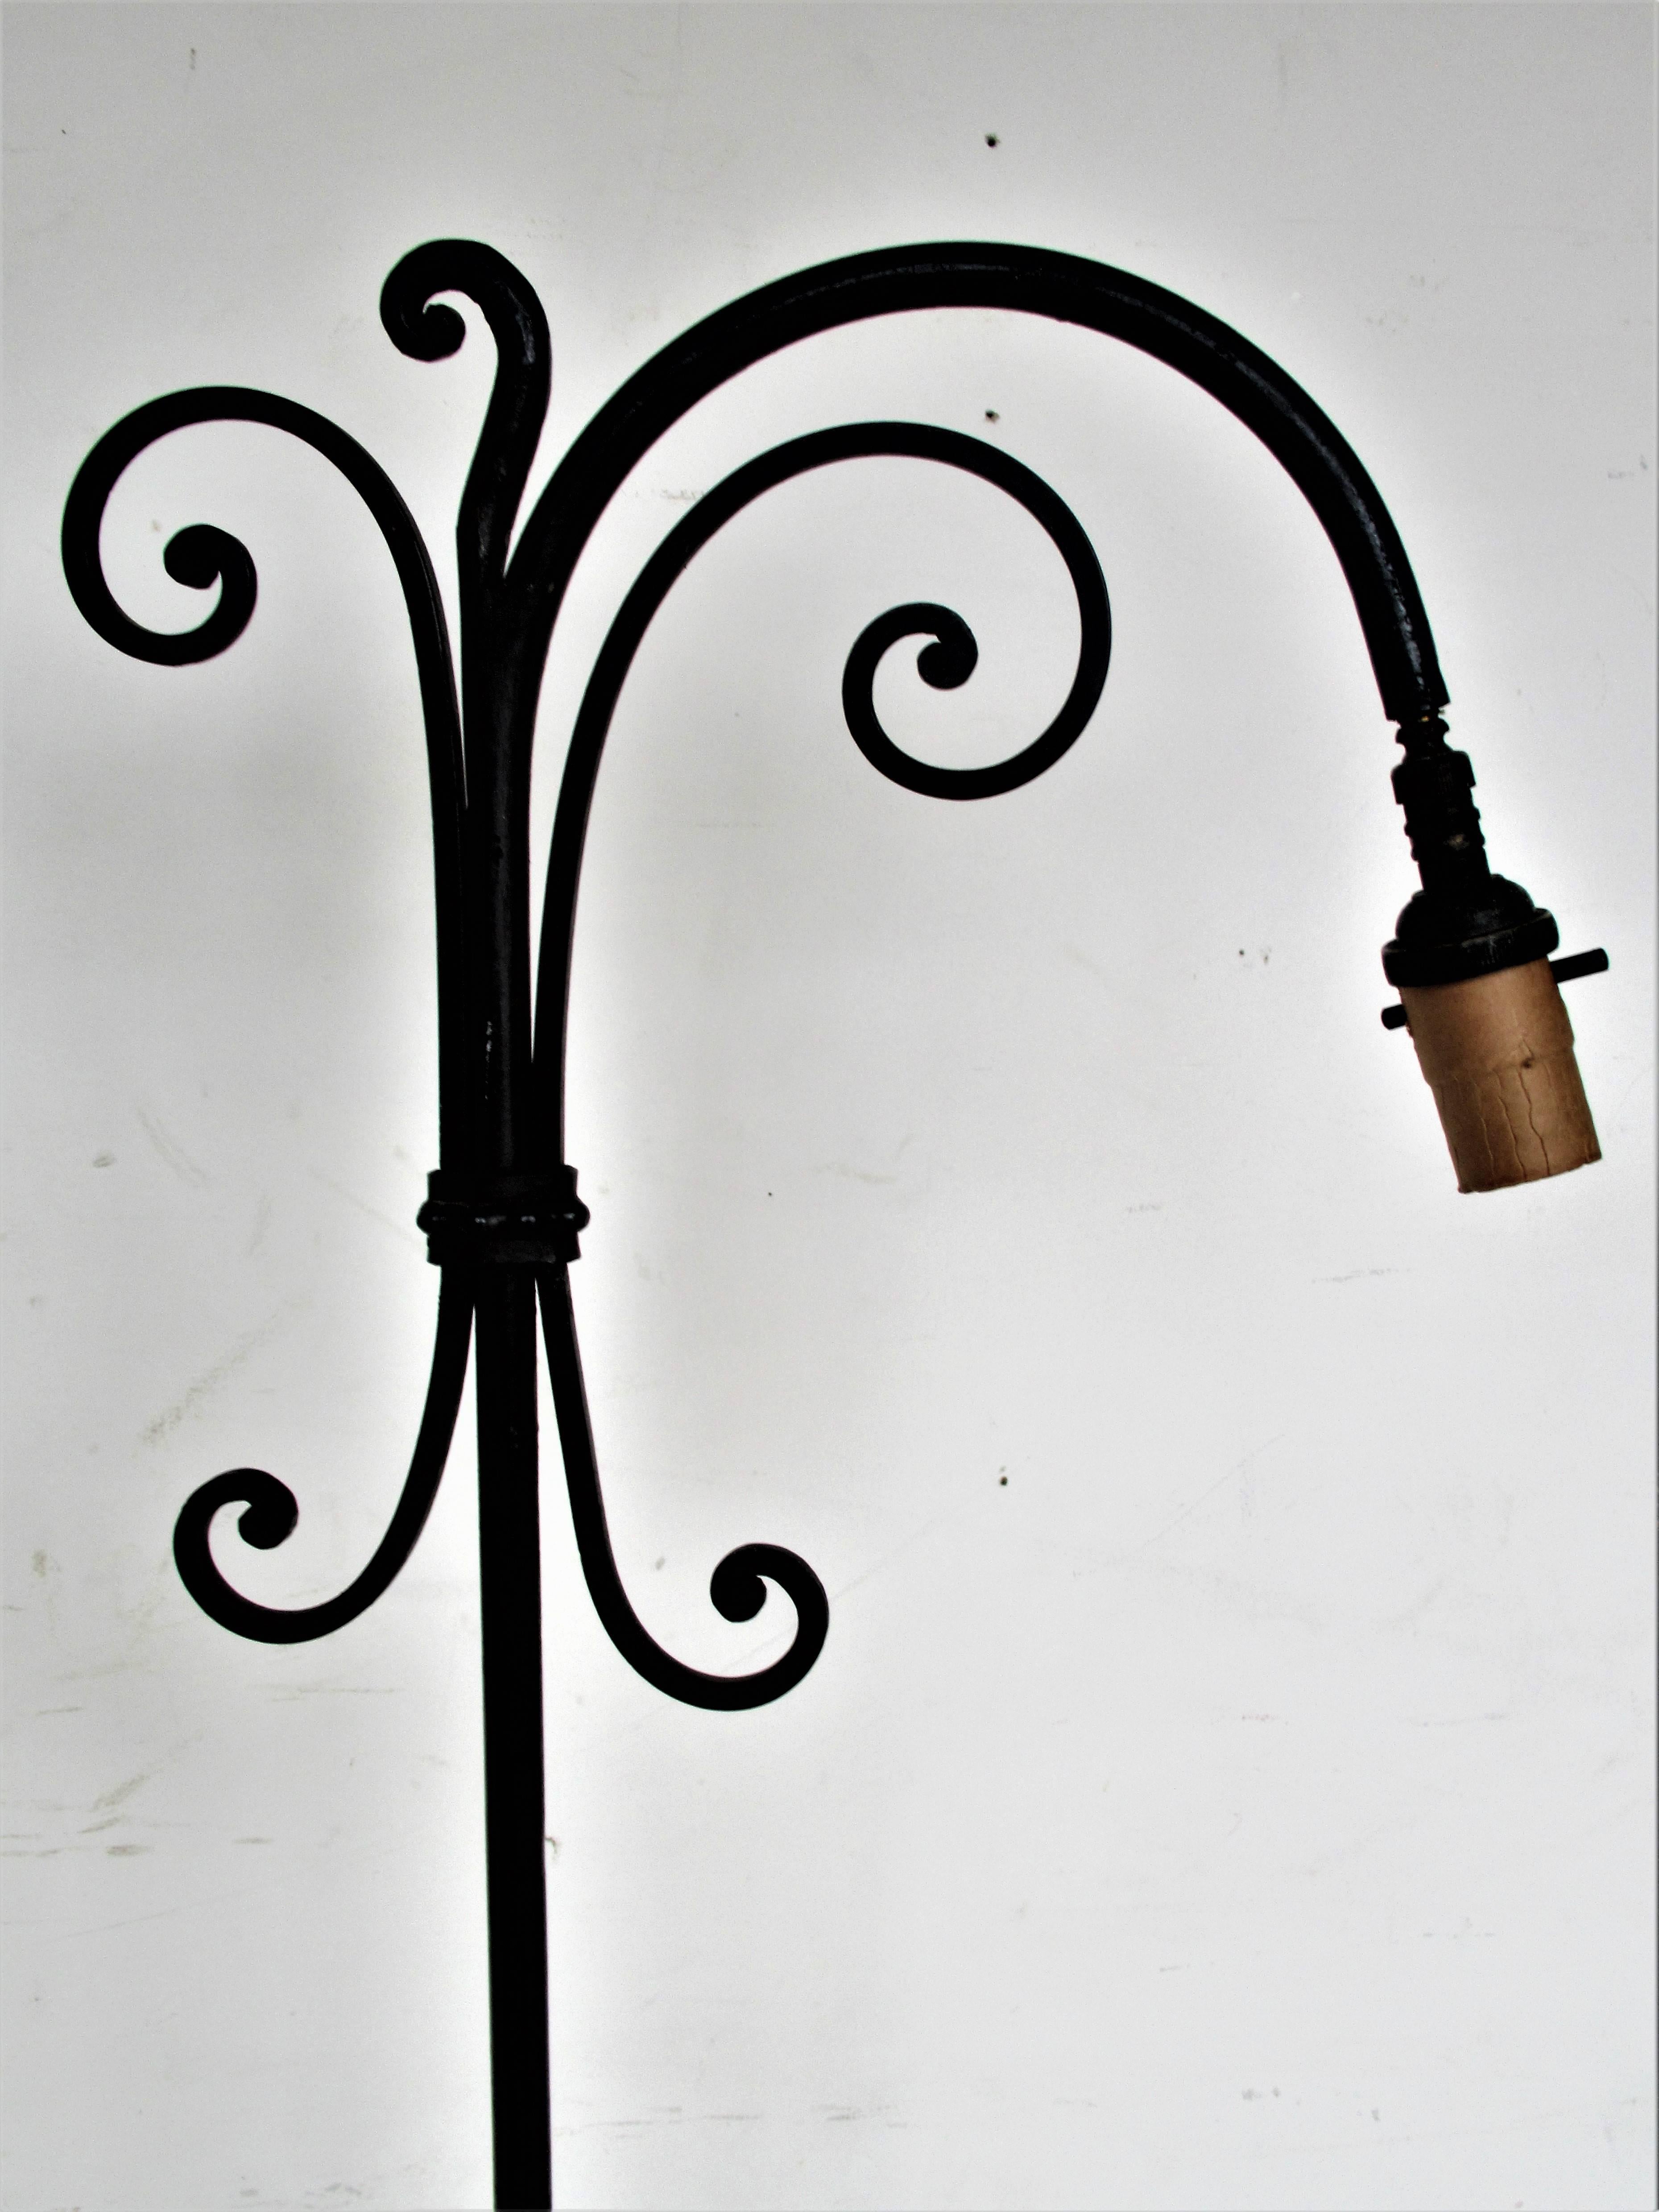 Wrought iron adjustable height floor lamp in a transitional Art Nouveau / Arts and Crafts design. Finely hand-wrought in original nicely aged blackened surface with light wear oxidation to metal. Highest height is 57 inches / lowest height is 43